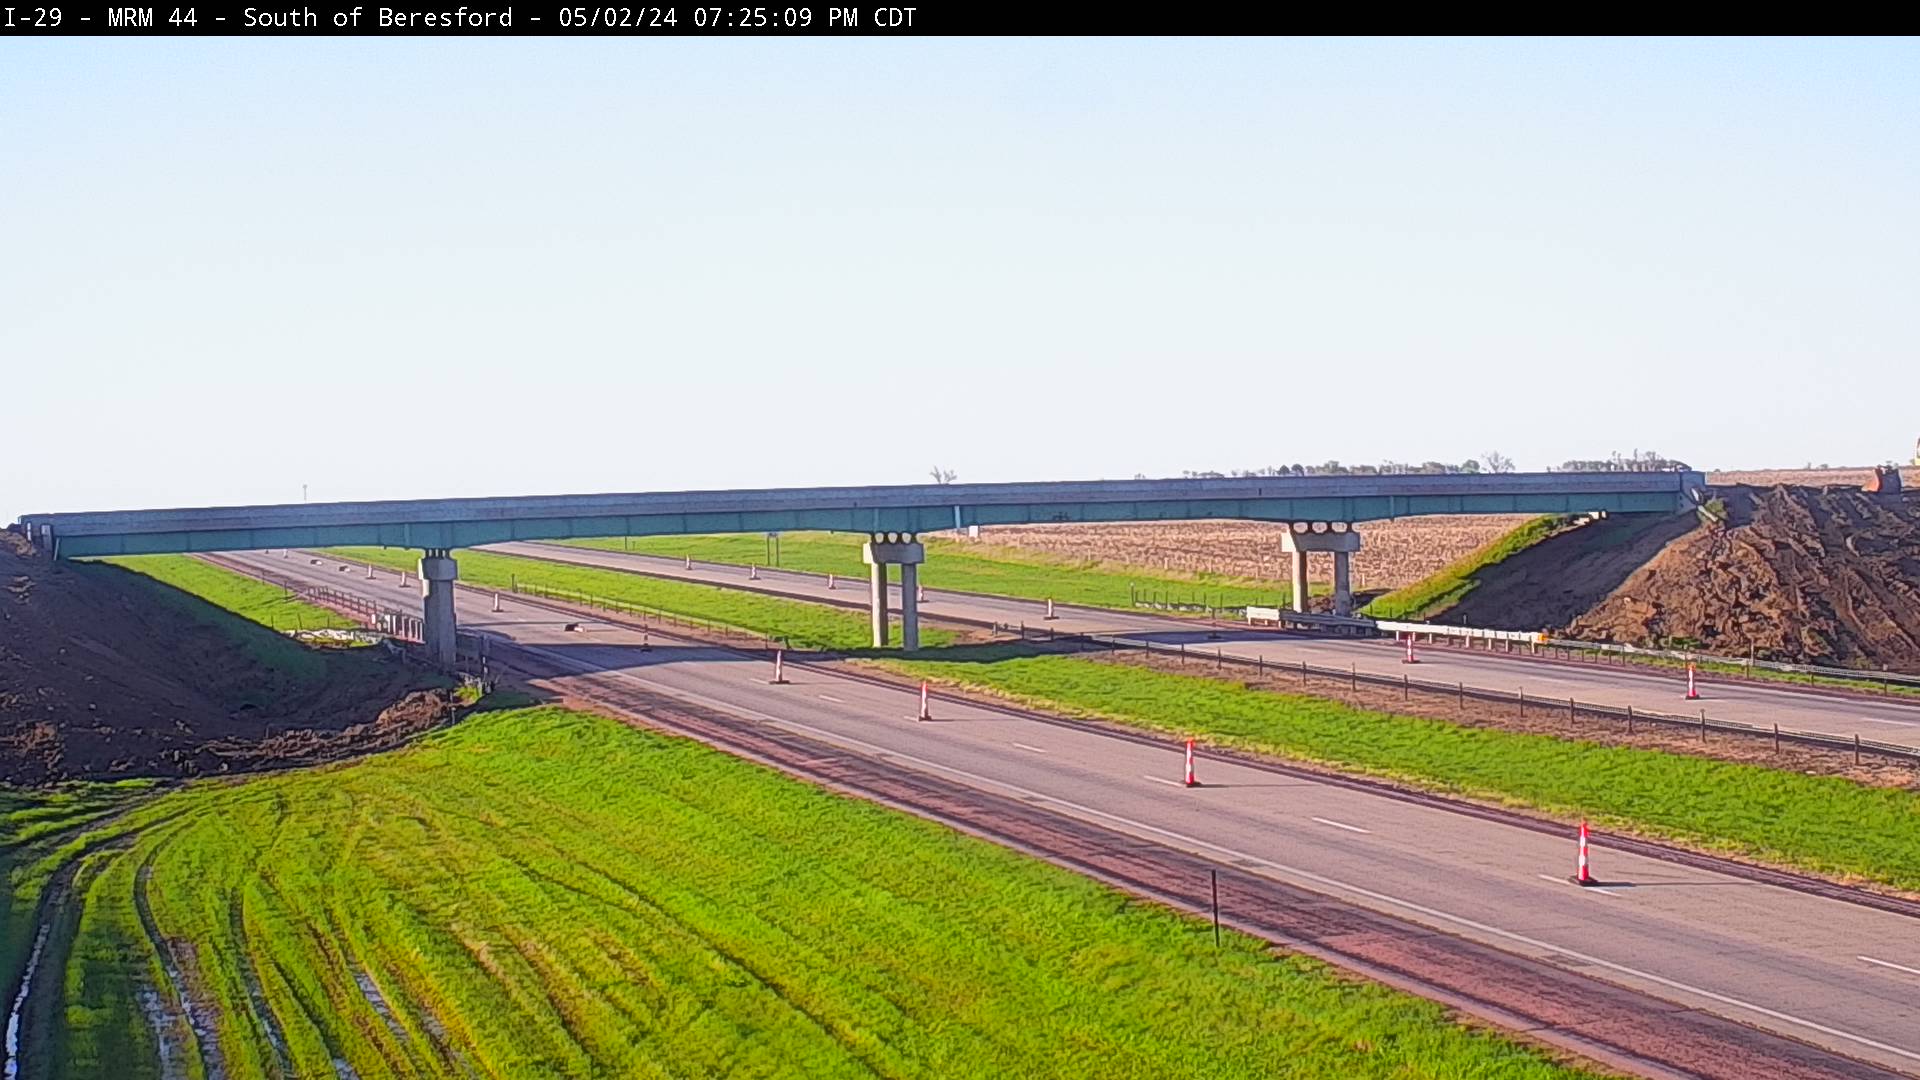 Traffic Cam 2 miles south of town along I-29 @ MP 44 - North Player